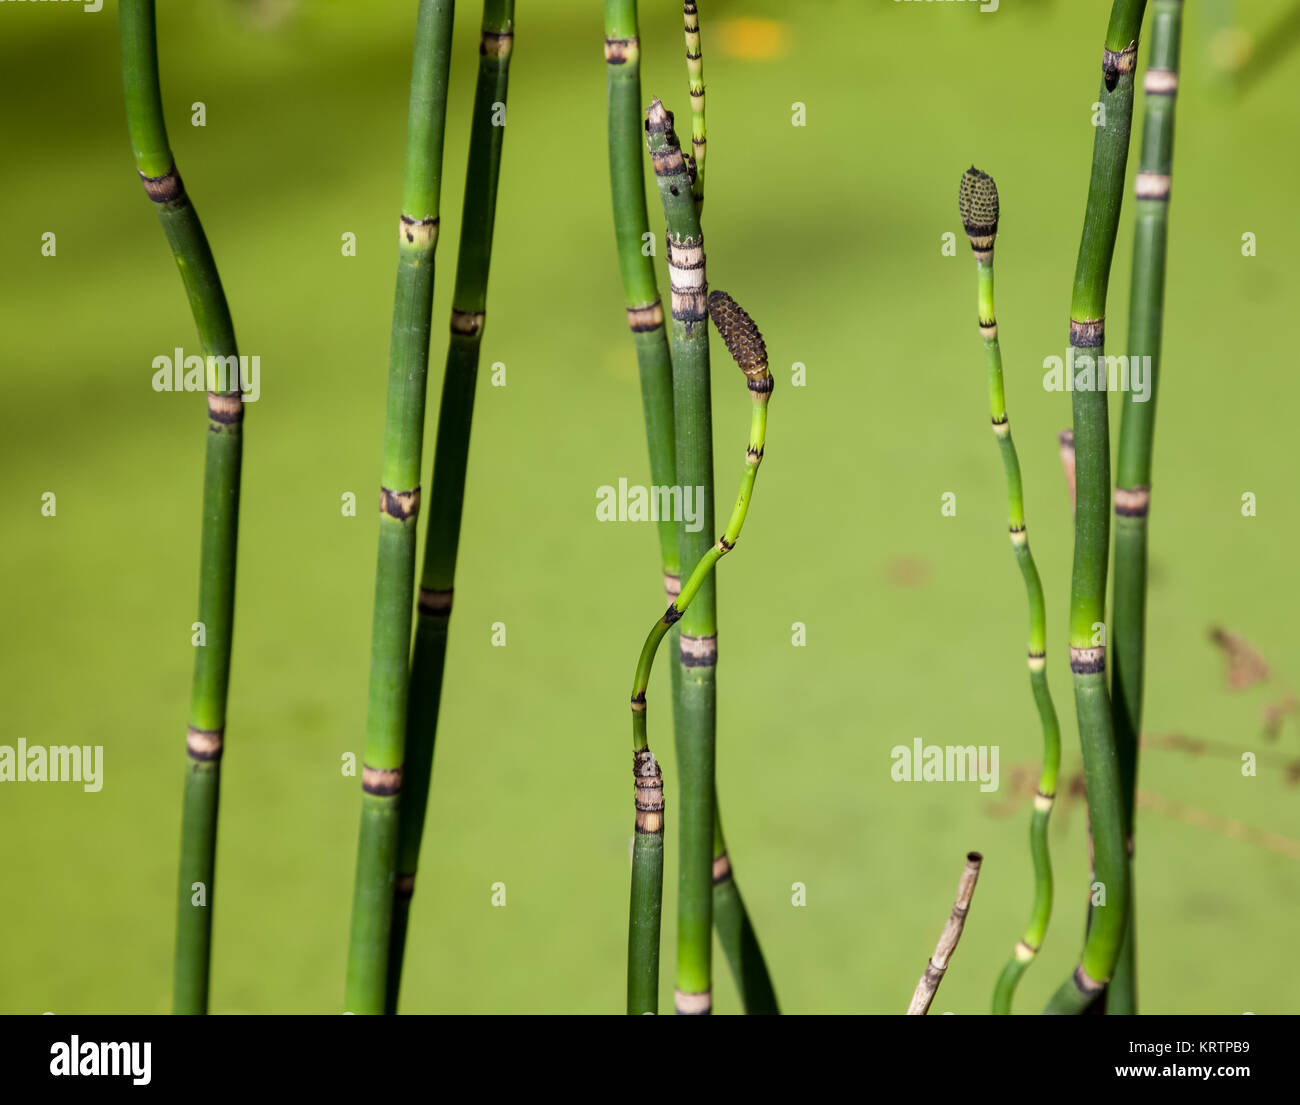 Equisetum hyemale stems against a background of green pond water Stock Photo